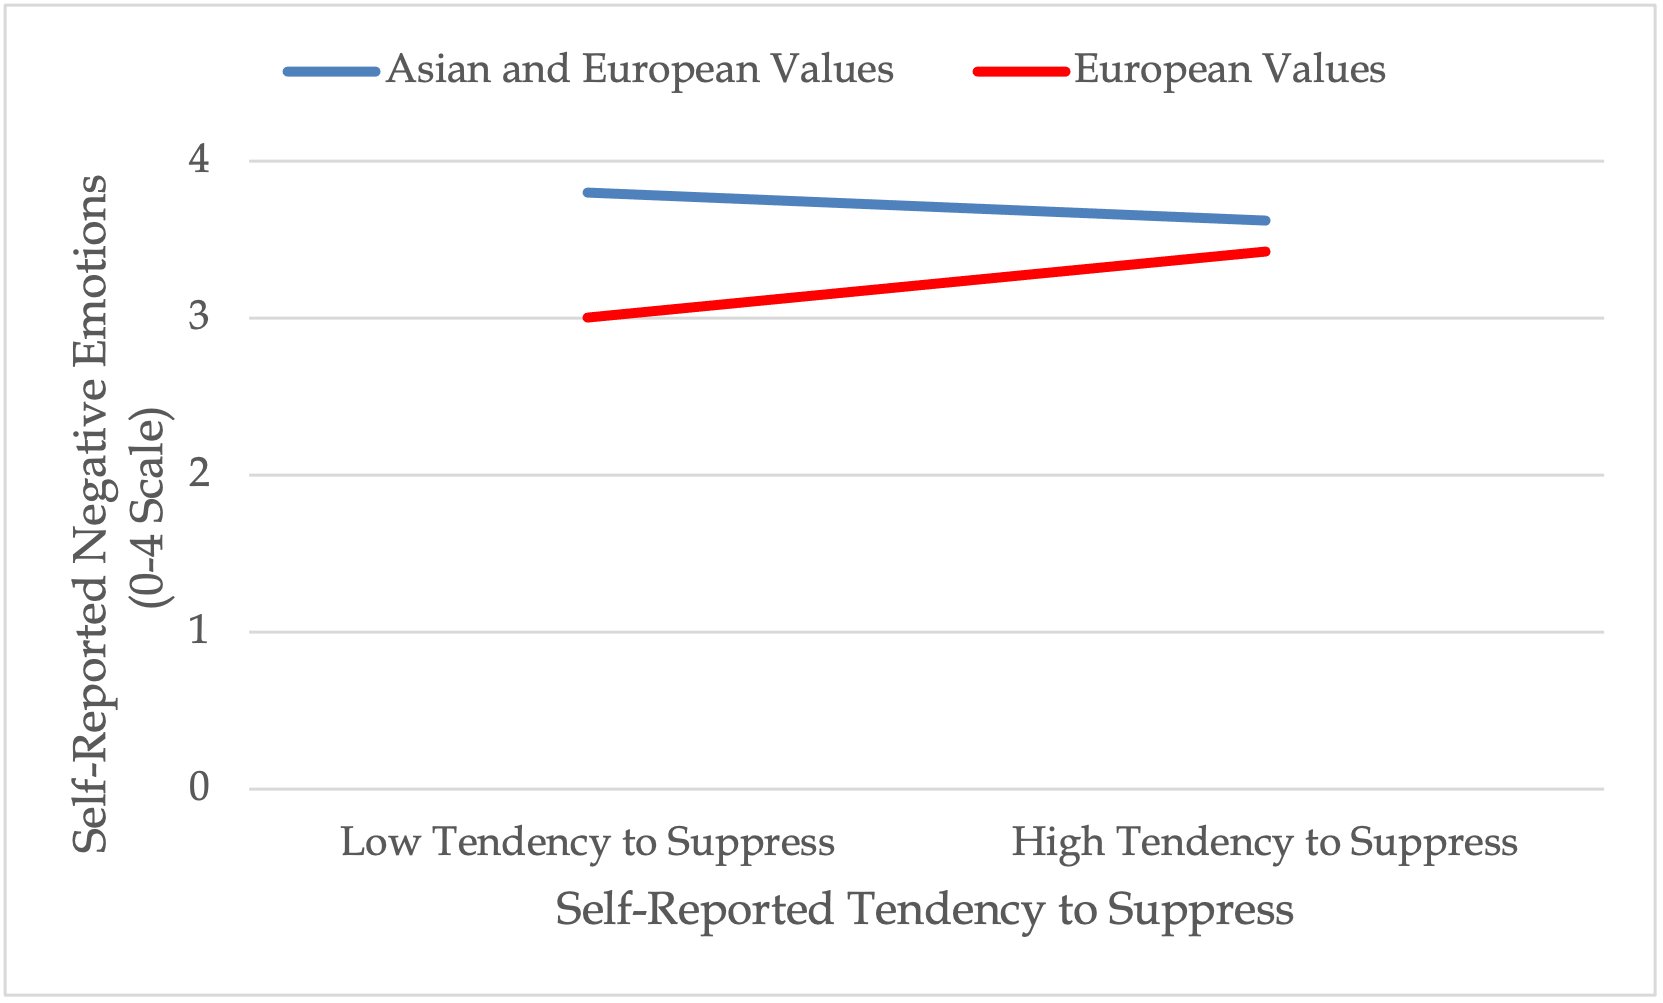 Self reported negative emotions (0 through 4) scale is the label of the y axis. Self reported tendency to suppress is the label of the x axis. A blue line is used on the graph to indicate asian and European values, and a red line is used to indicate european values. the x axis is also incremented in two sections that make up the x axis. Low tendency to suppress is the starting section of the x axis, then halfway through the x axis, it changes to High tendency to suppress. So the lines are indicating a low tendency to suppress the negative emotions near the lines start, and as they travel the x axis, the data at the end of he line represents a high tendency to suppress.